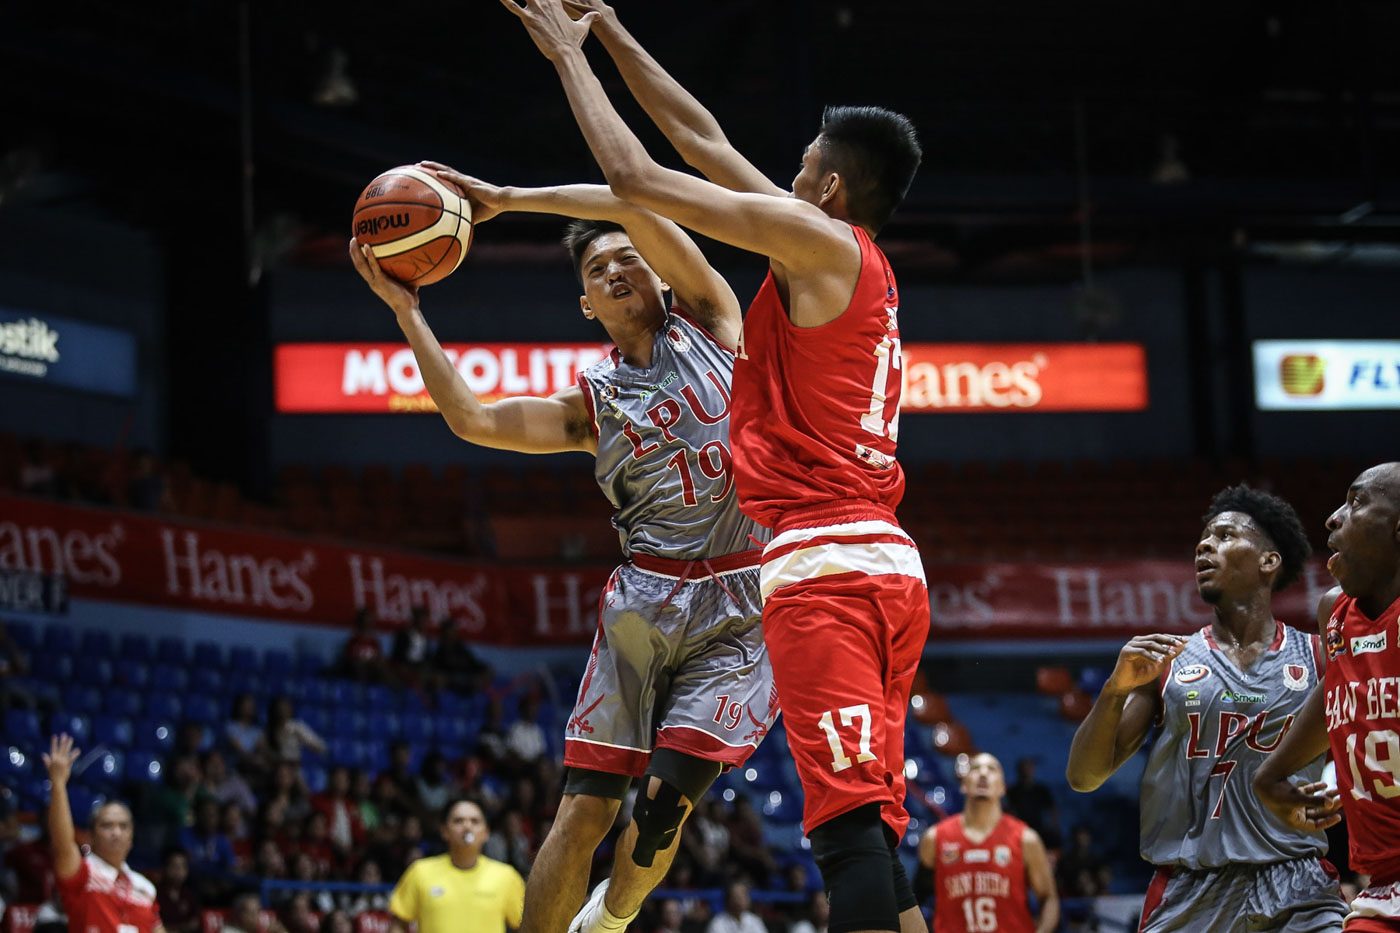 Lyceum escapes pesky San Beda to earn back-to-back NCAA victories